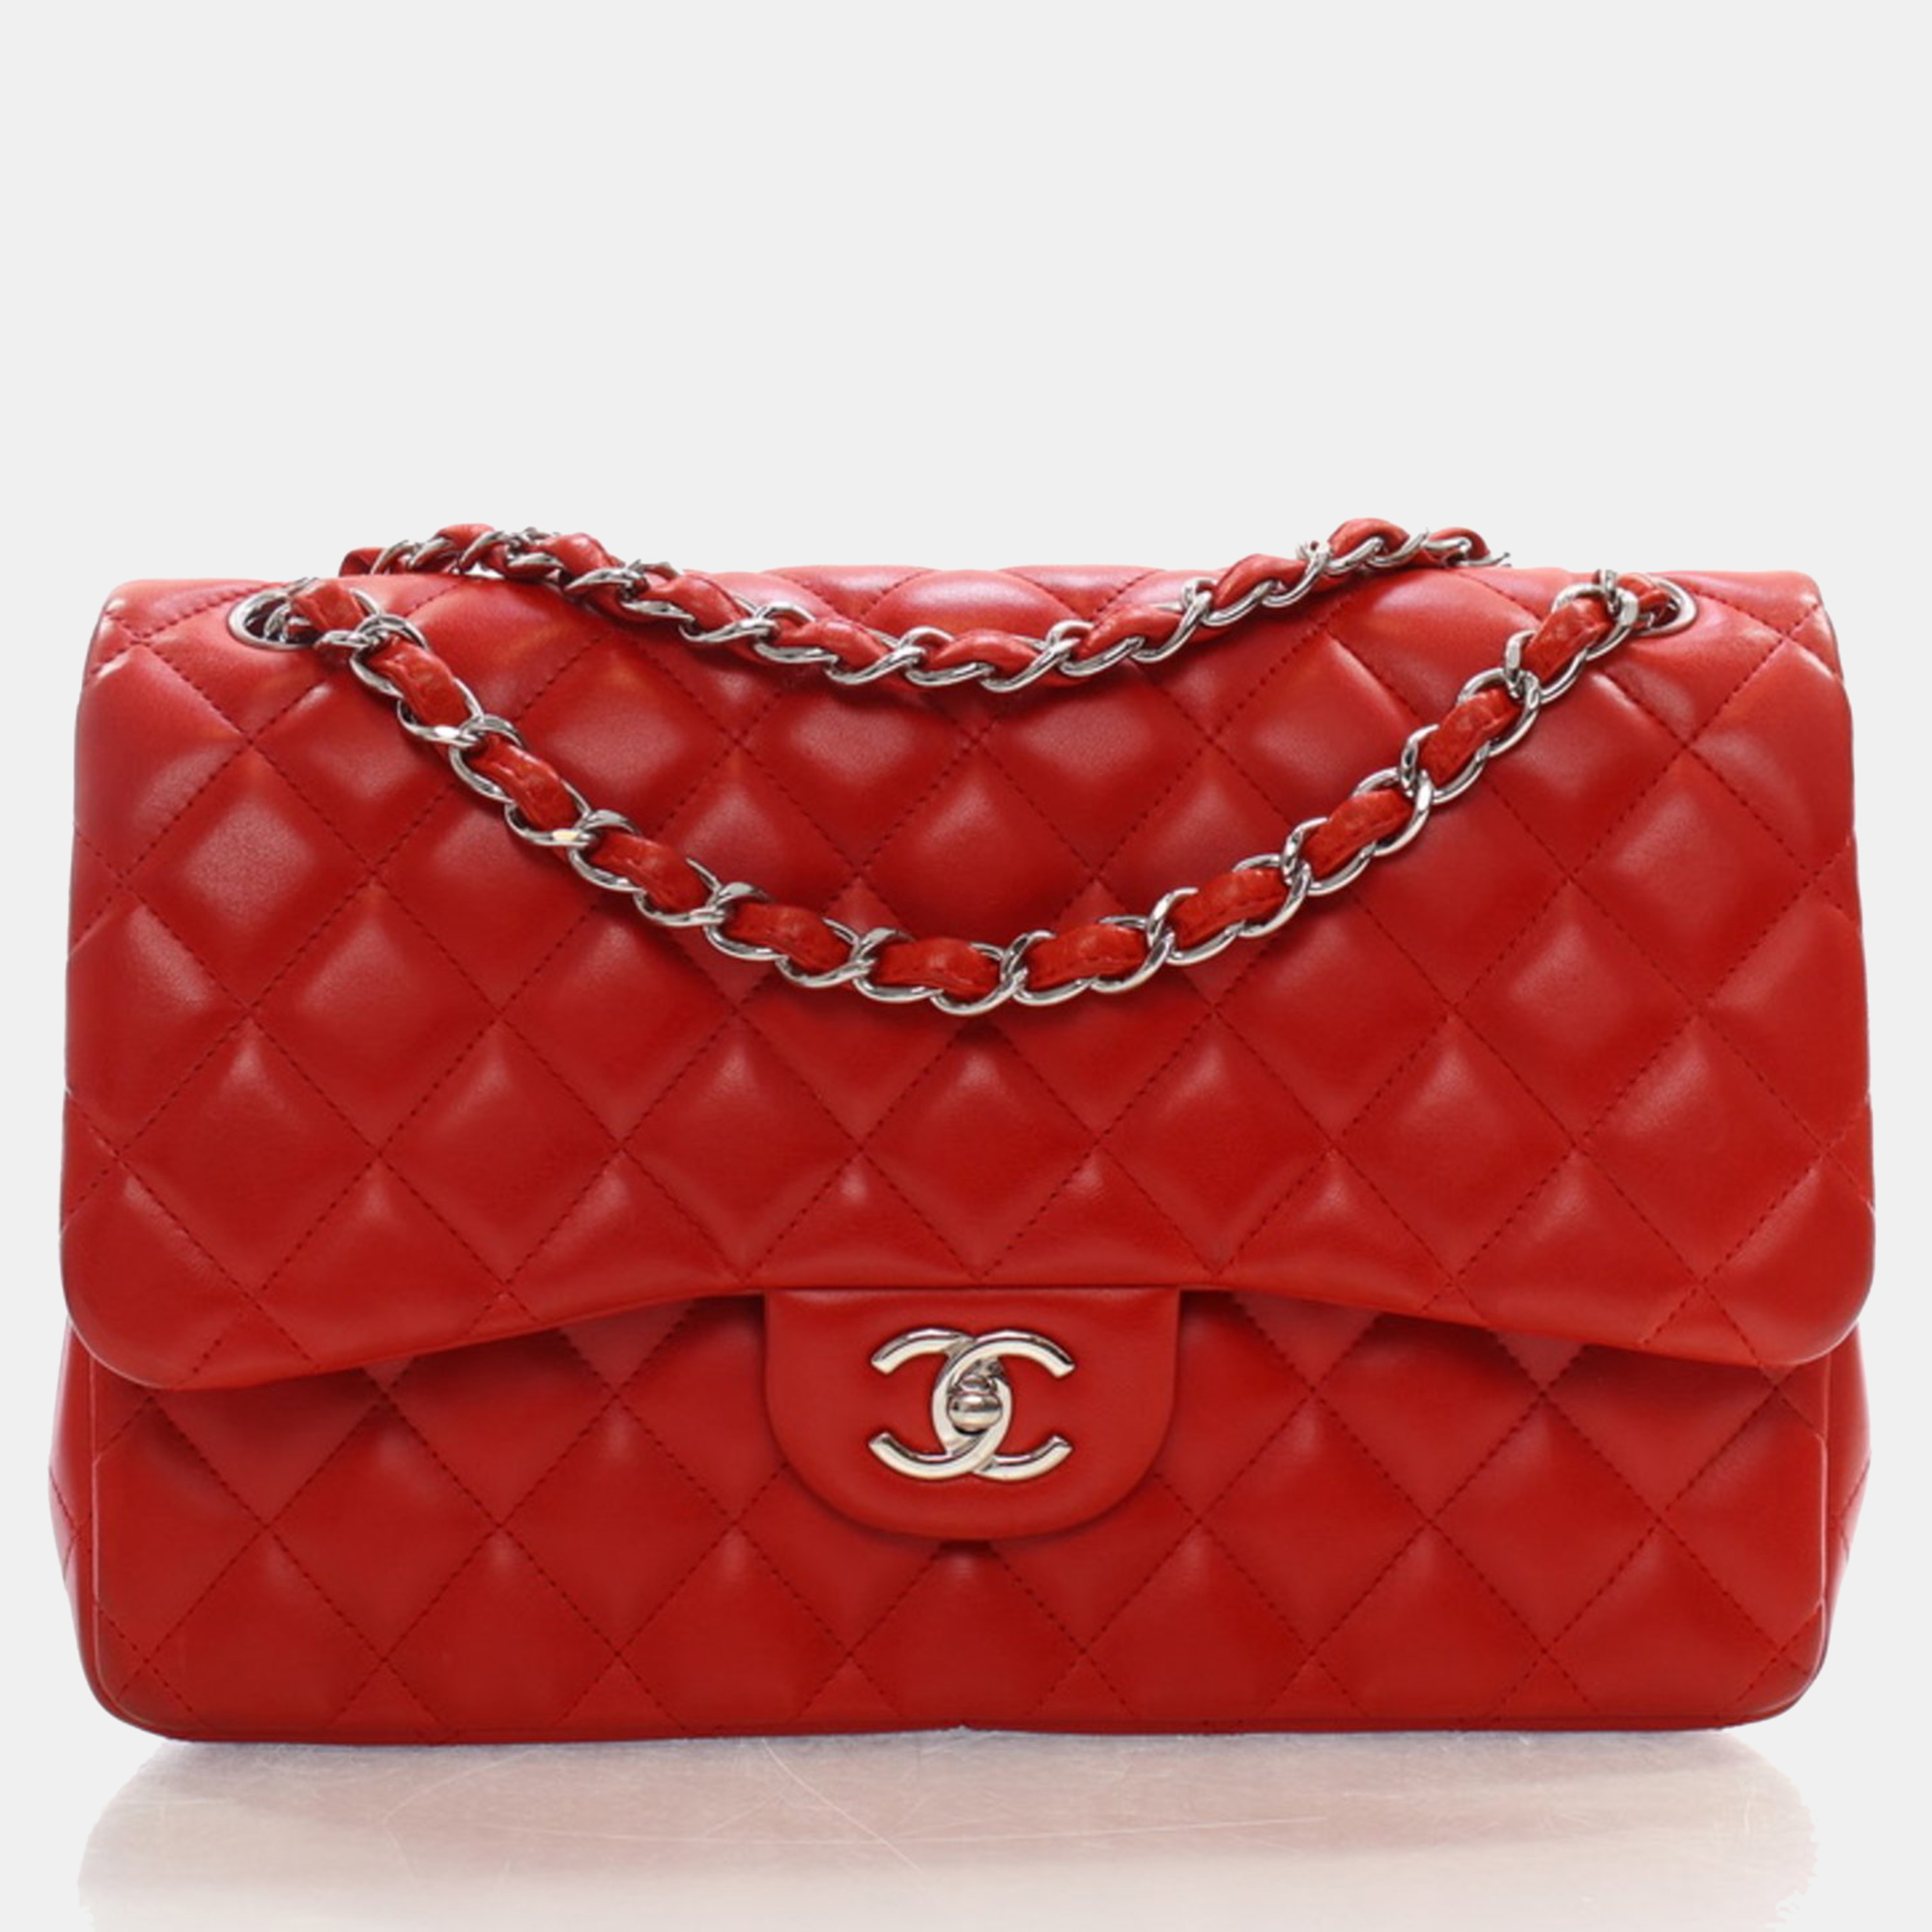 Chanel red lambskin leather jumbo classic double flap shoulder bag